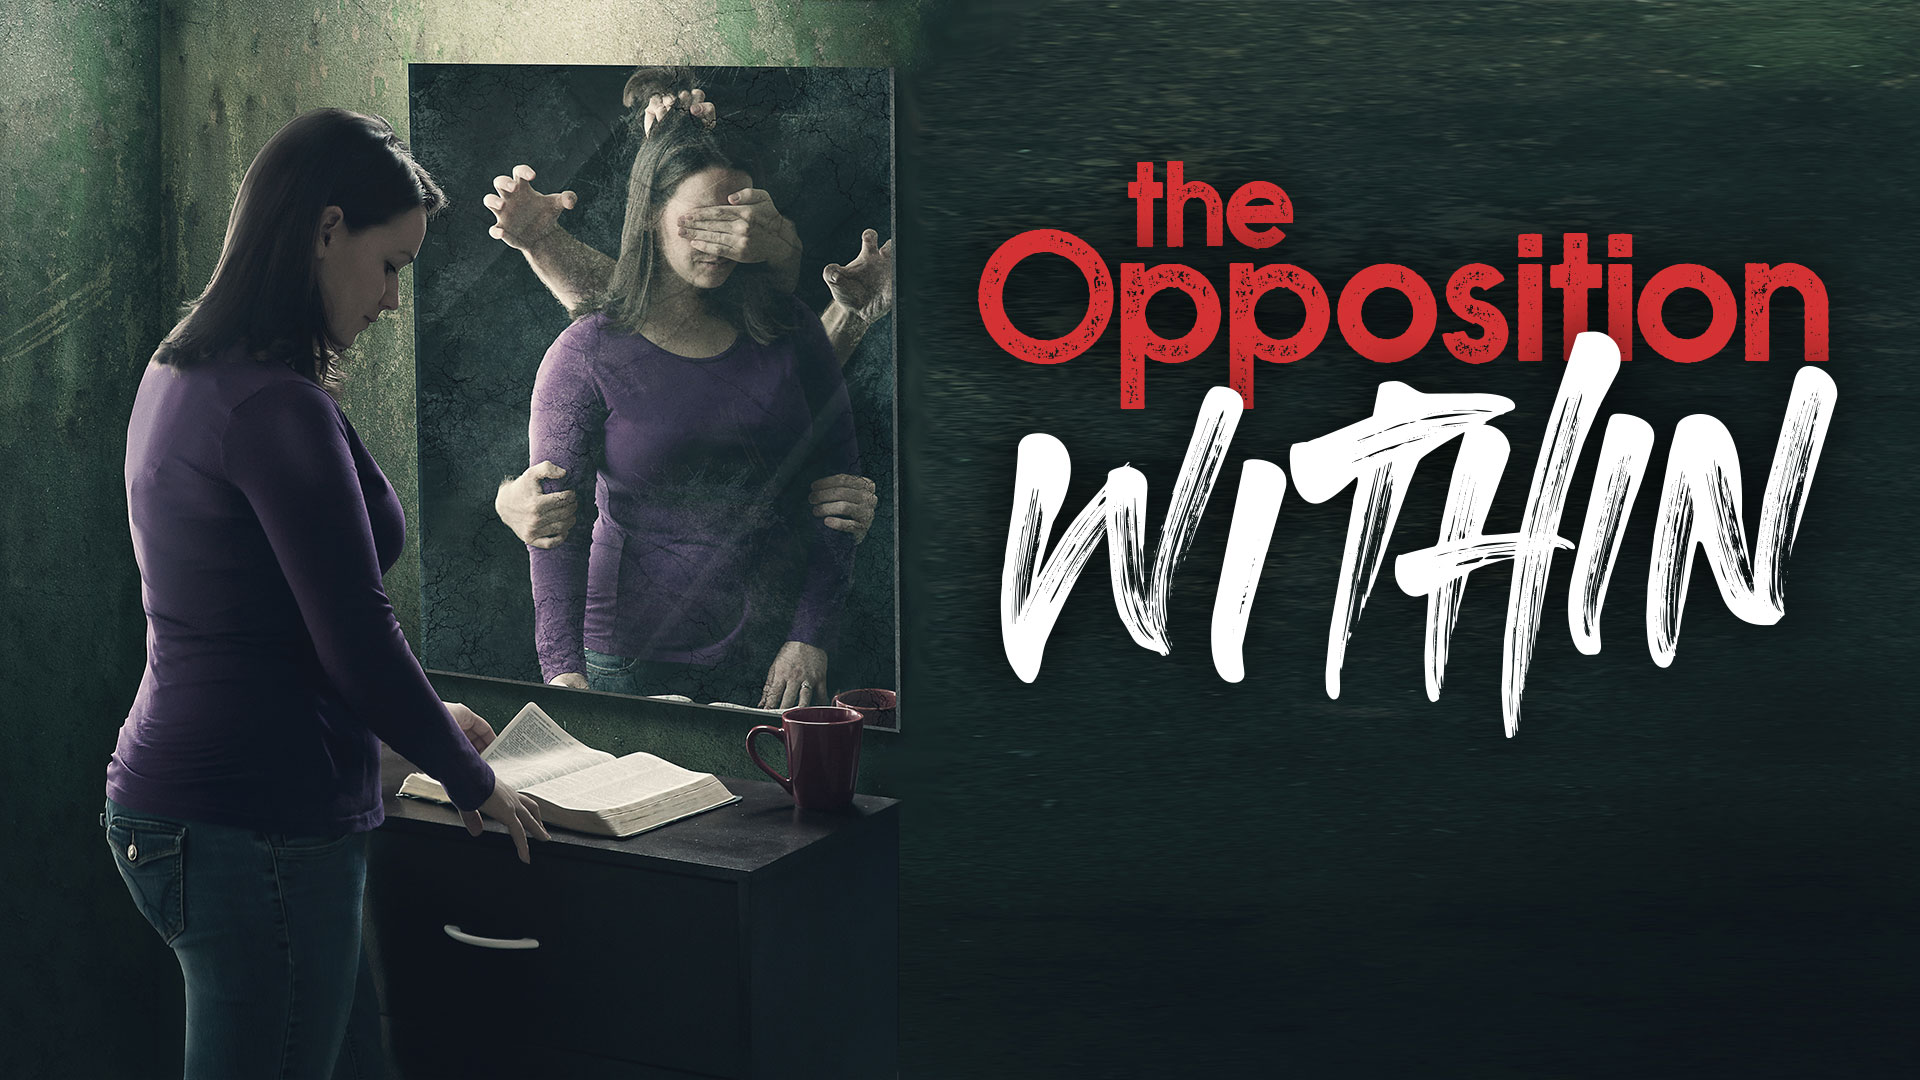 The Opposition Within Image